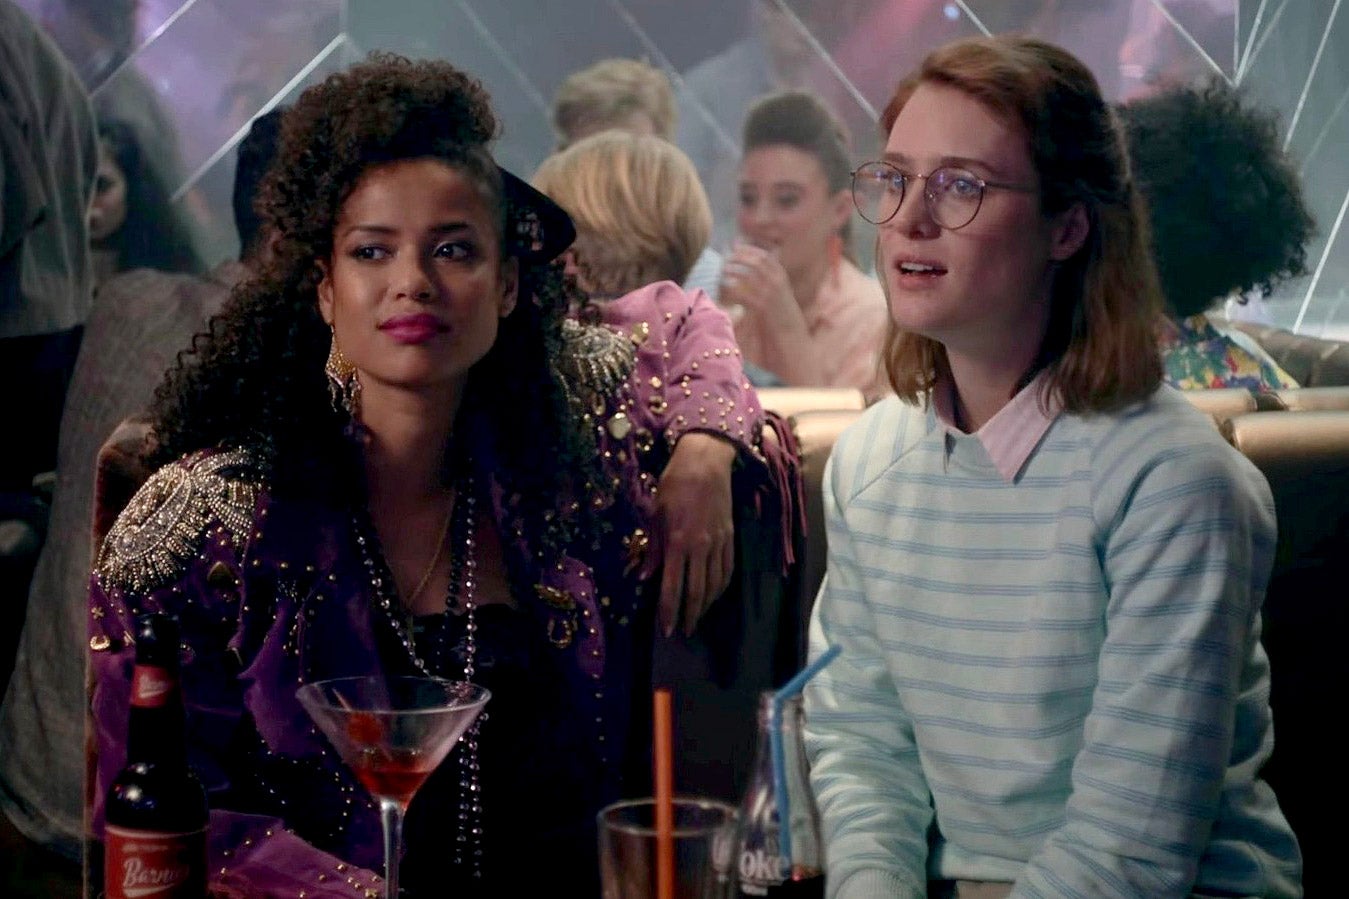 A black woman in glam ’80s gear and a white woman in preppy ’80s gear sit in a bar and look ahead in amusement.